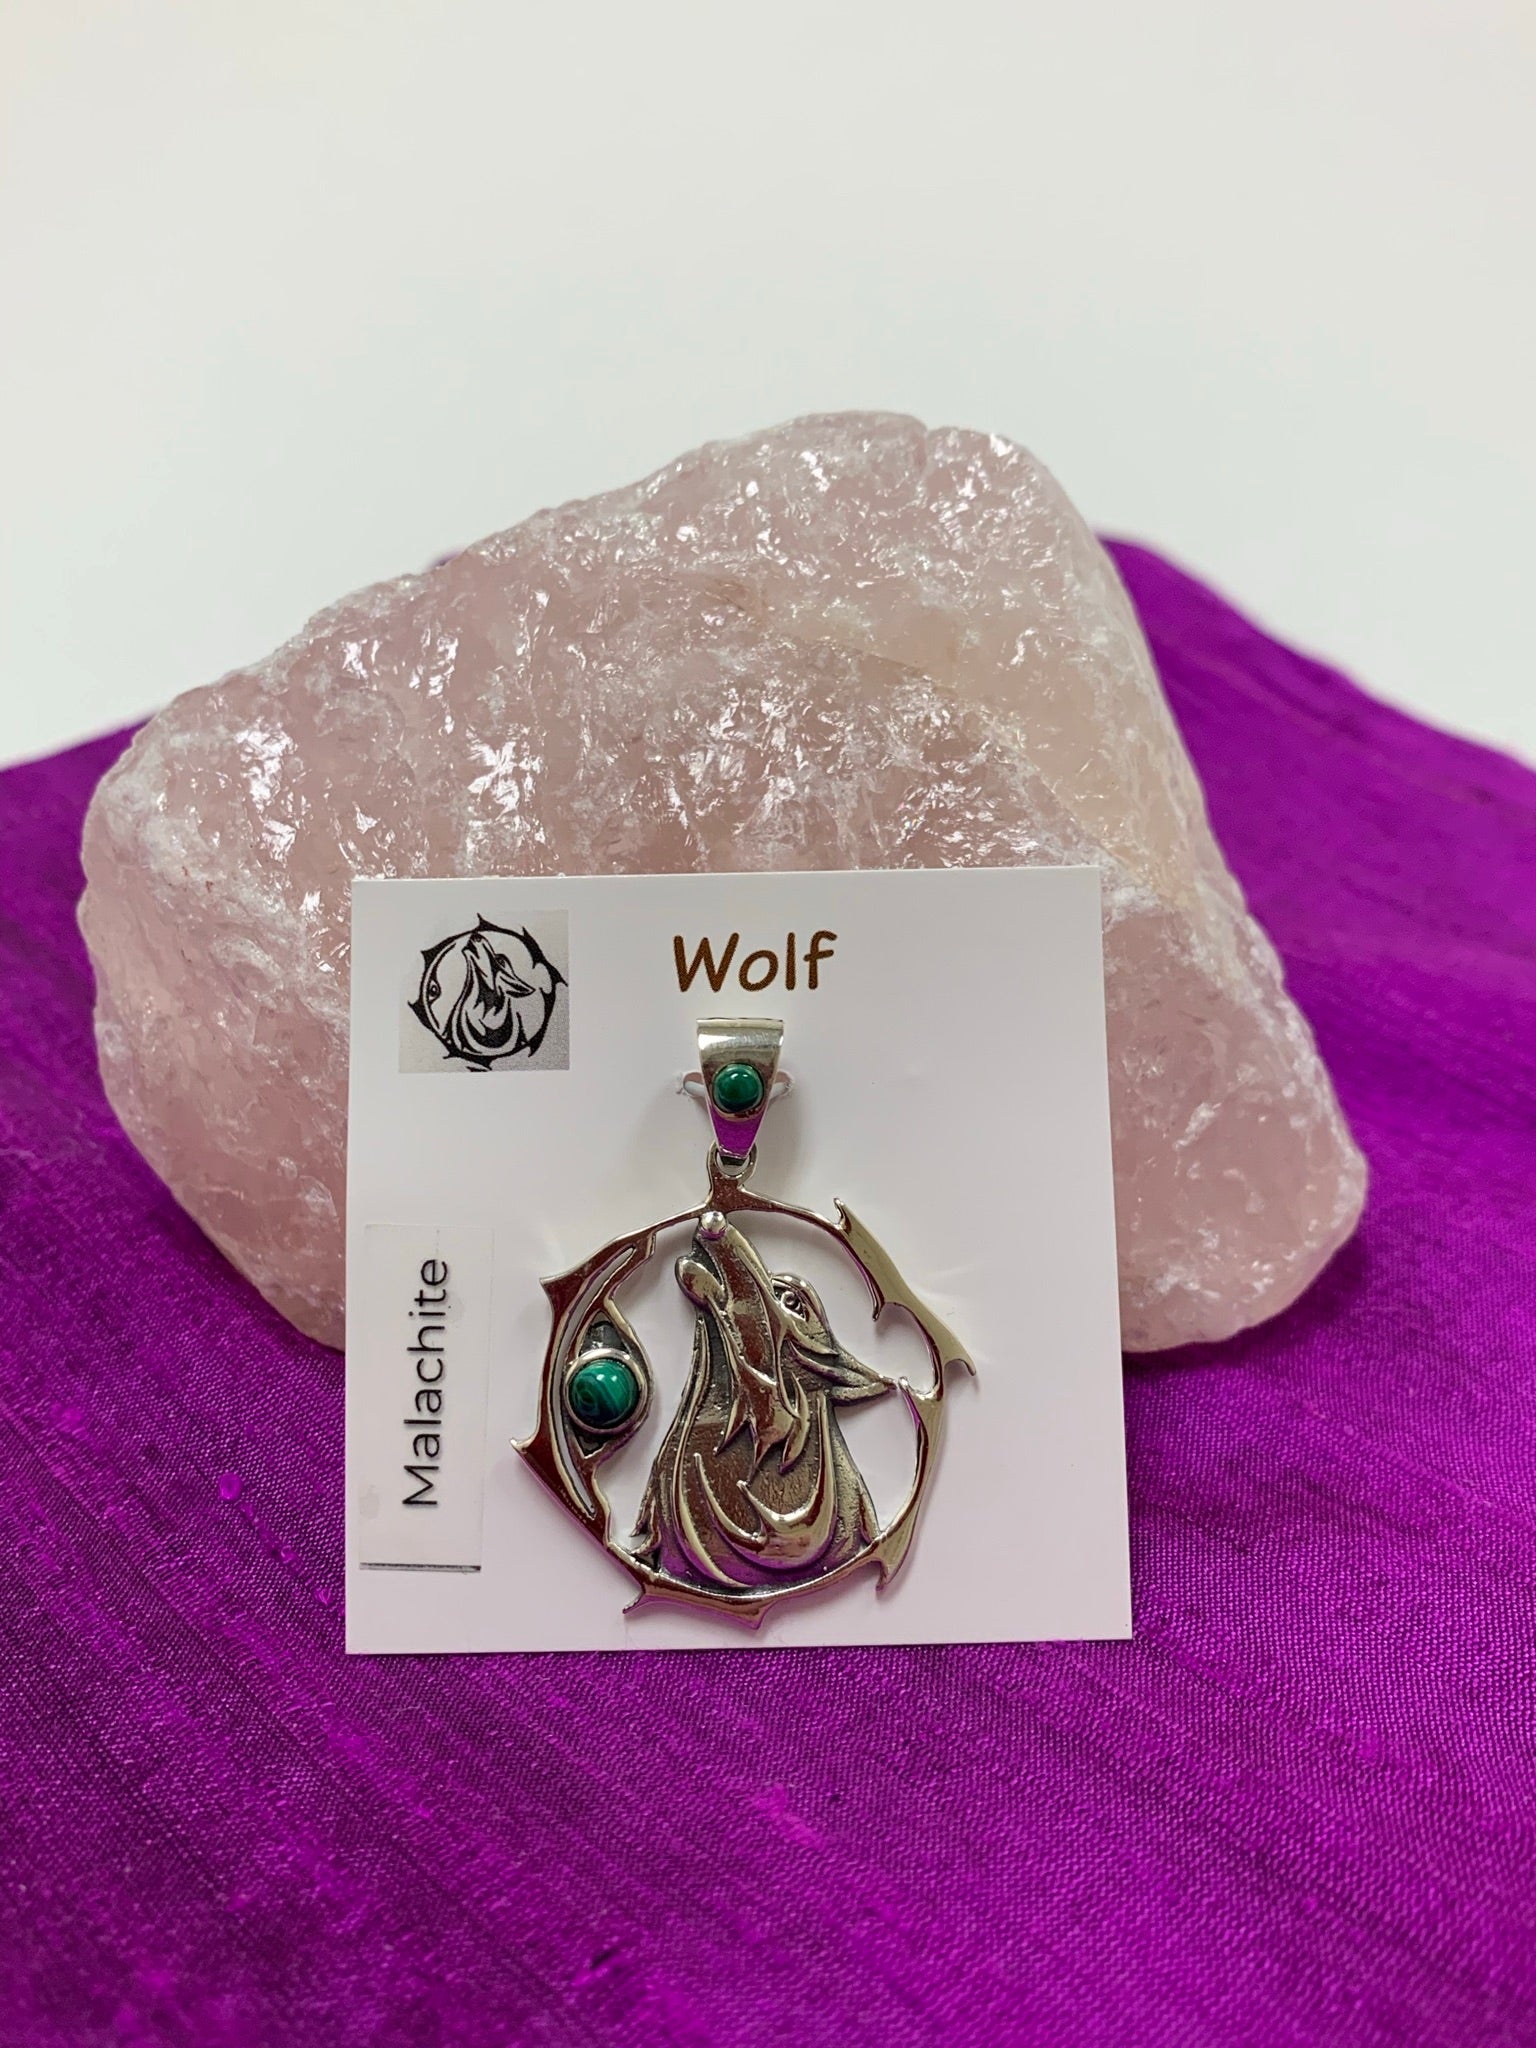 Sterling Silver wolf spirit animal pendant. Howling wolf (head and part of body) inside a fancy, stylized circle. Two malachite gemstones (cabs), one on the actual pendant and one on the bail. Wear your spirit animal on your chest and carry it with you wherever you go! (Pendant only, no necklace chain).